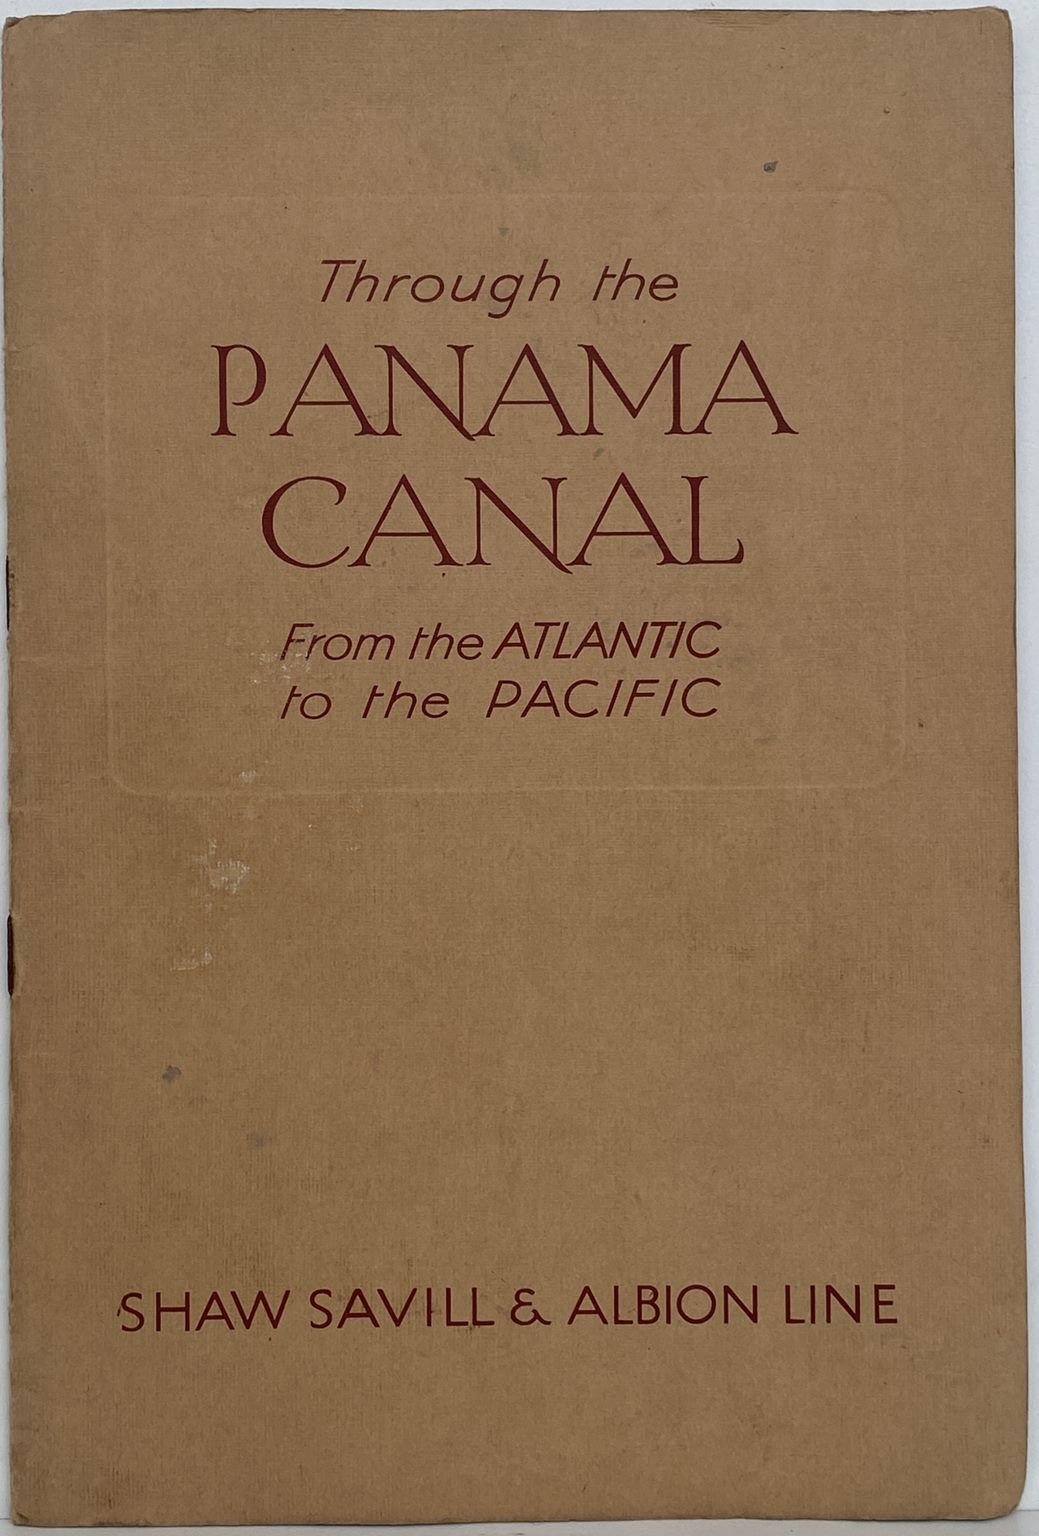 Through the PANAMA CANAL - From the Atlantic to the Pacific